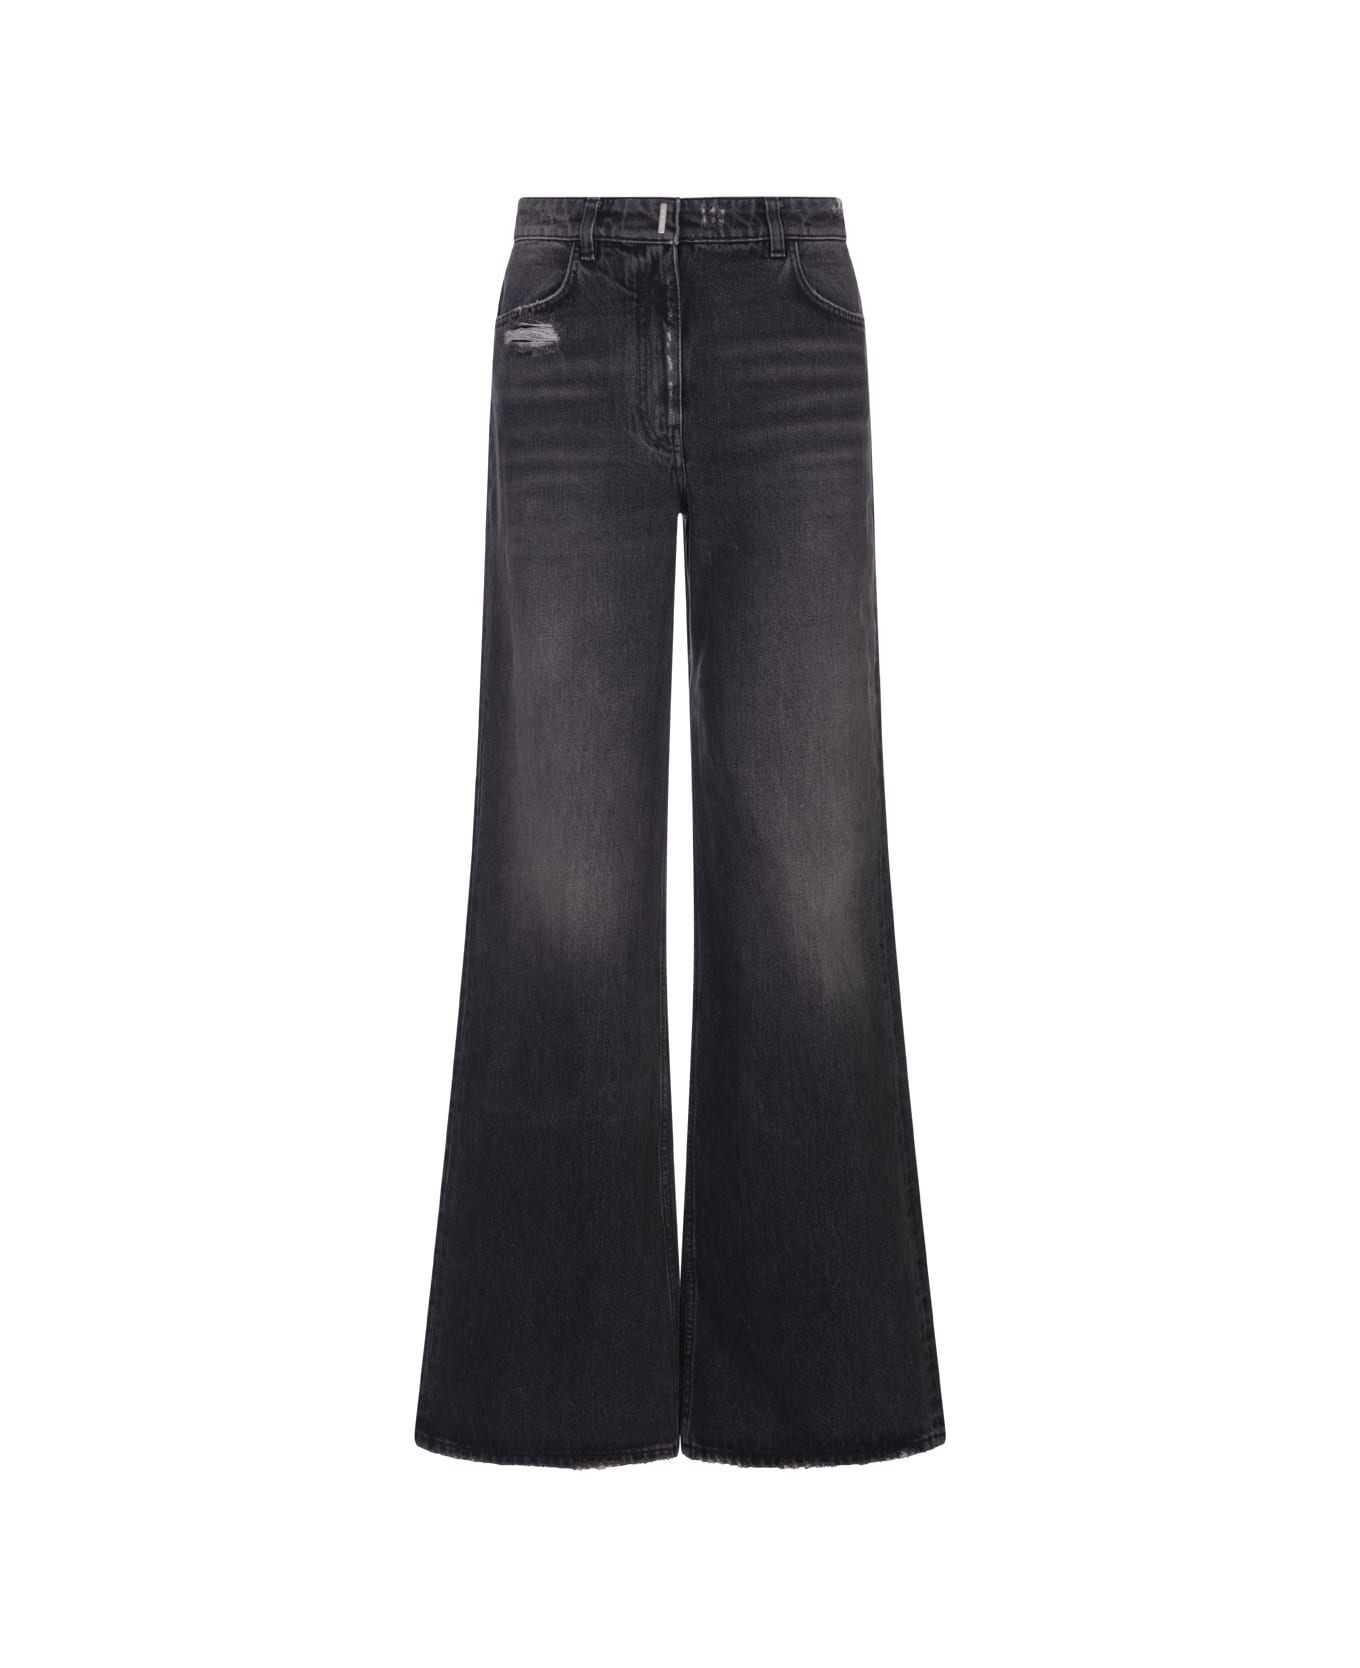 Givenchy Destroyed Workwear Jeans